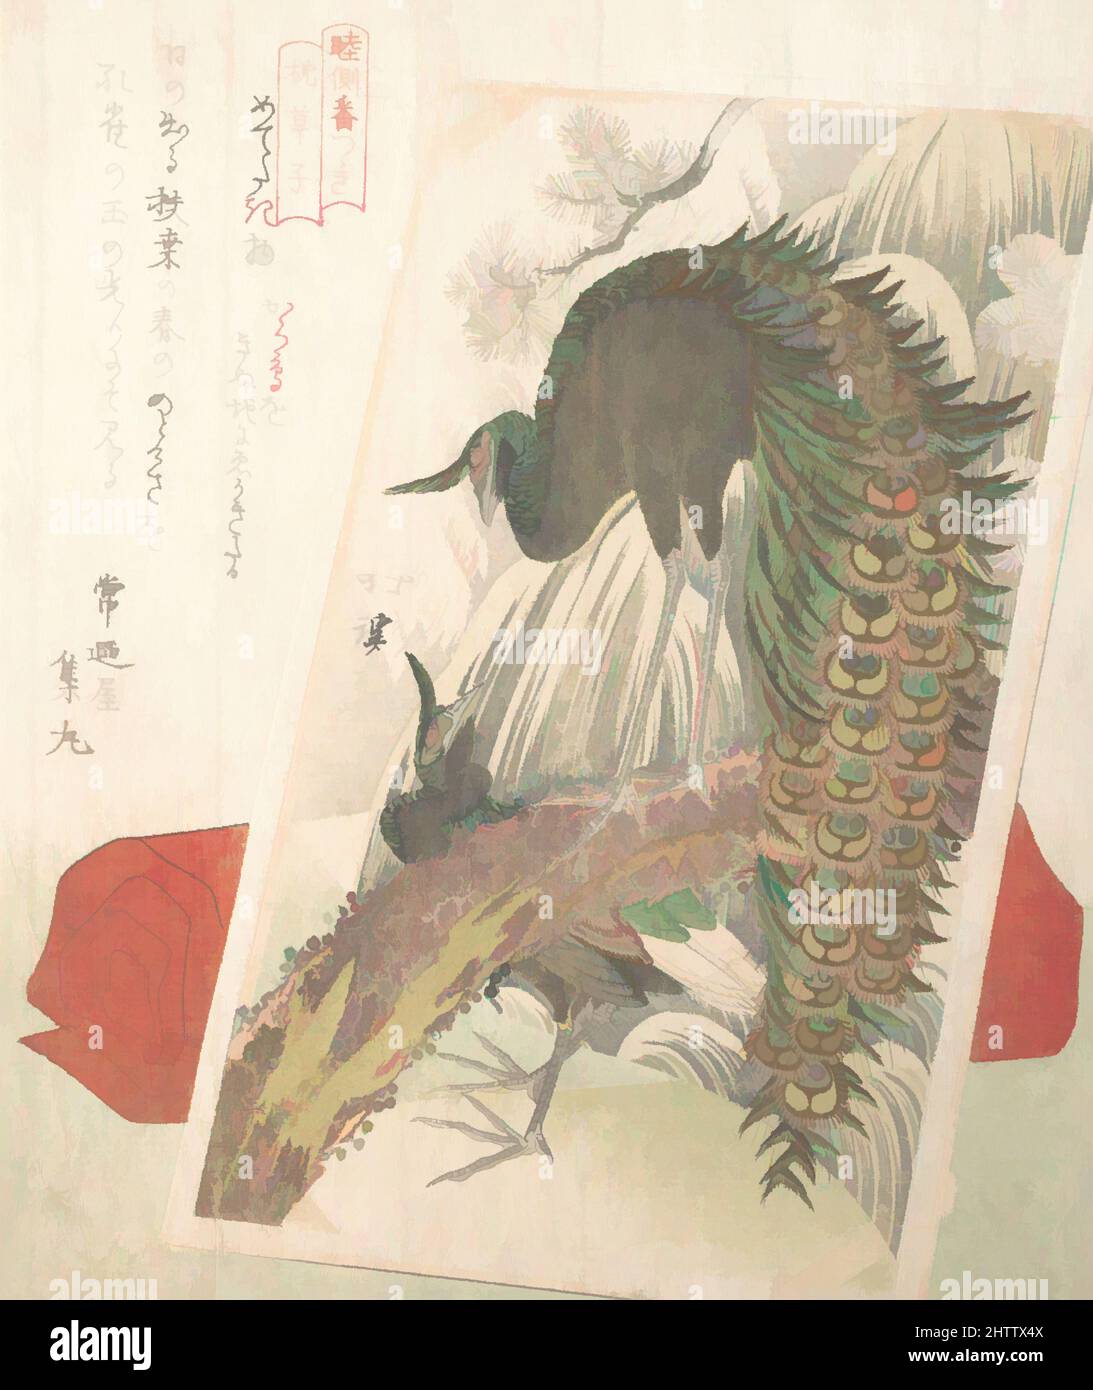 Art inspired by Painting of Peacocks, Pines, a Waterfall, and a Roll of Red Fabric, 松・滝に孔雀図と緋毛氈, Edo period (1615–1868), ca. 1818, Japan, Polychrome woodblock print (surimono); ink and color on paper, 8 1/2 x 7 1/4 in. (21.6 x 18.4 cm), Prints, Totoya Hokkei (Japanese, 1780–1850, Classic works modernized by Artotop with a splash of modernity. Shapes, color and value, eye-catching visual impact on art. Emotions through freedom of artworks in a contemporary way. A timeless message pursuing a wildly creative new direction. Artists turning to the digital medium and creating the Artotop NFT Stock Photo